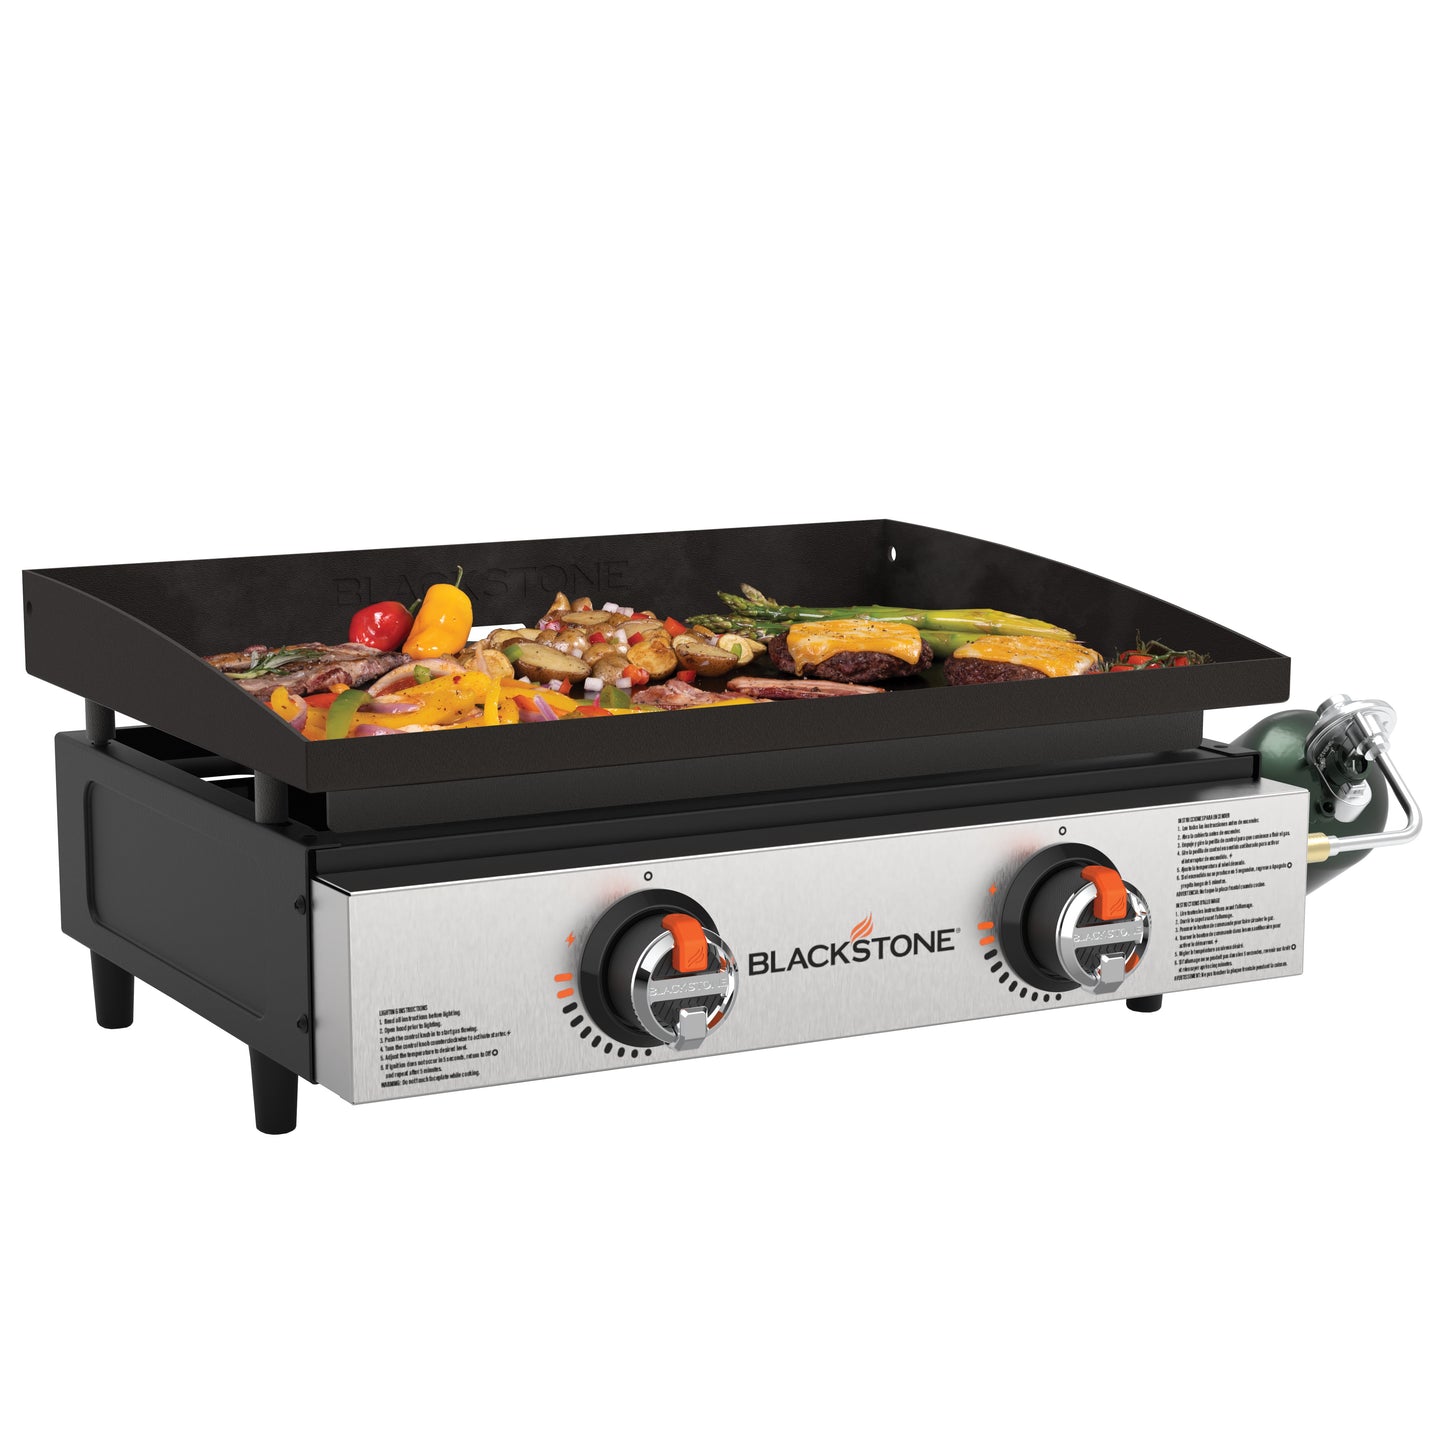 Blackstone 22inch Tabletop Griddle No Cover